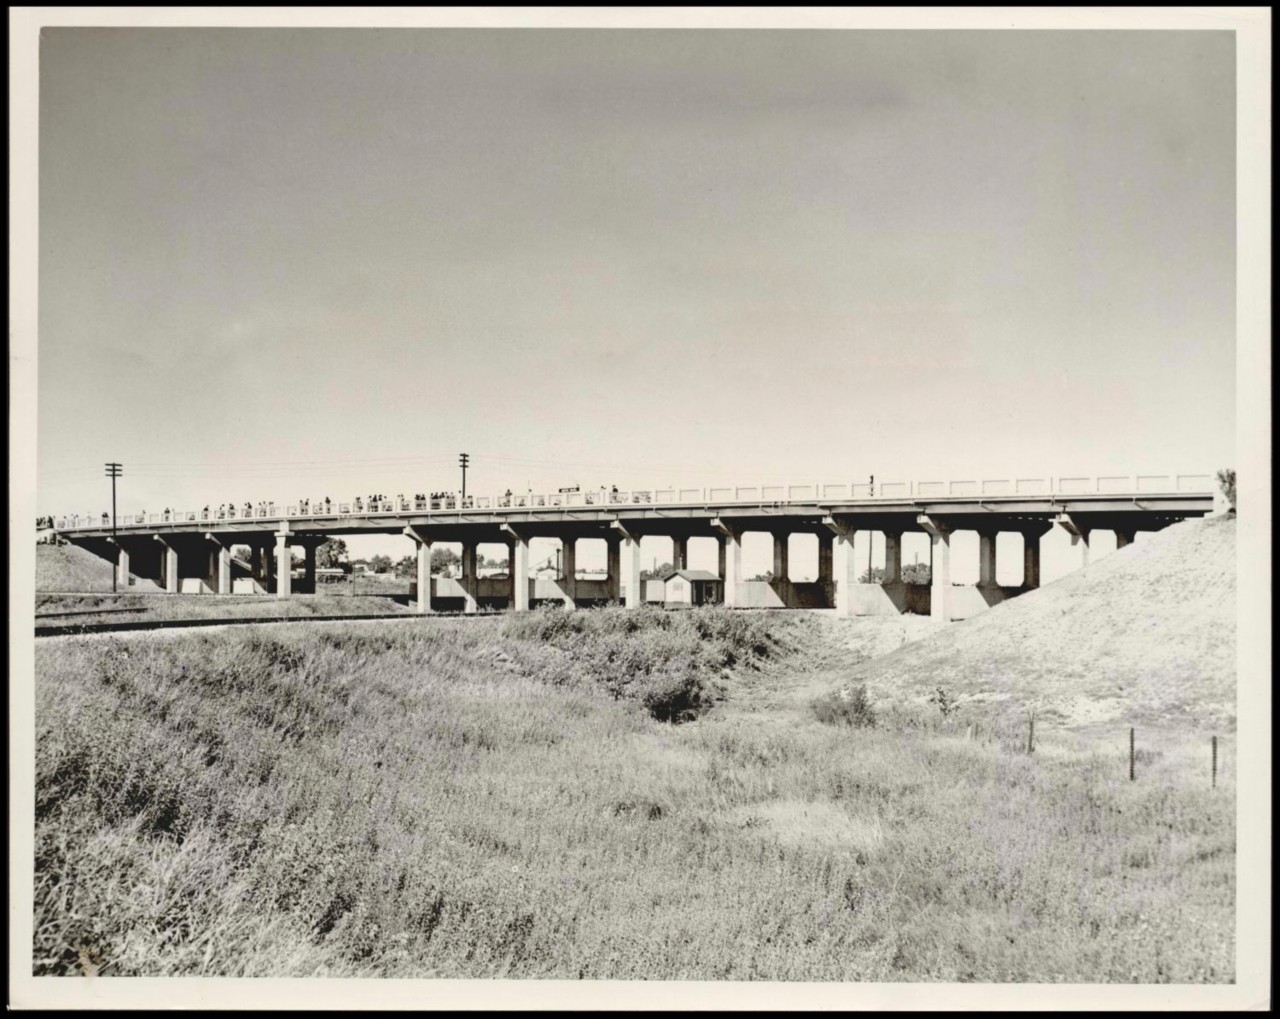 BRIDGES/ STATE / MISC : UNKNOWN: Caption reads, Traffic flowed Friday night over the US Highways 81 and 66 overpass over the Rock Island Railroad tracks intersection south of El Reno. Staff Photo by Richard Cobb. Original Photo 09/20/1946. Published on O-9-21-46.